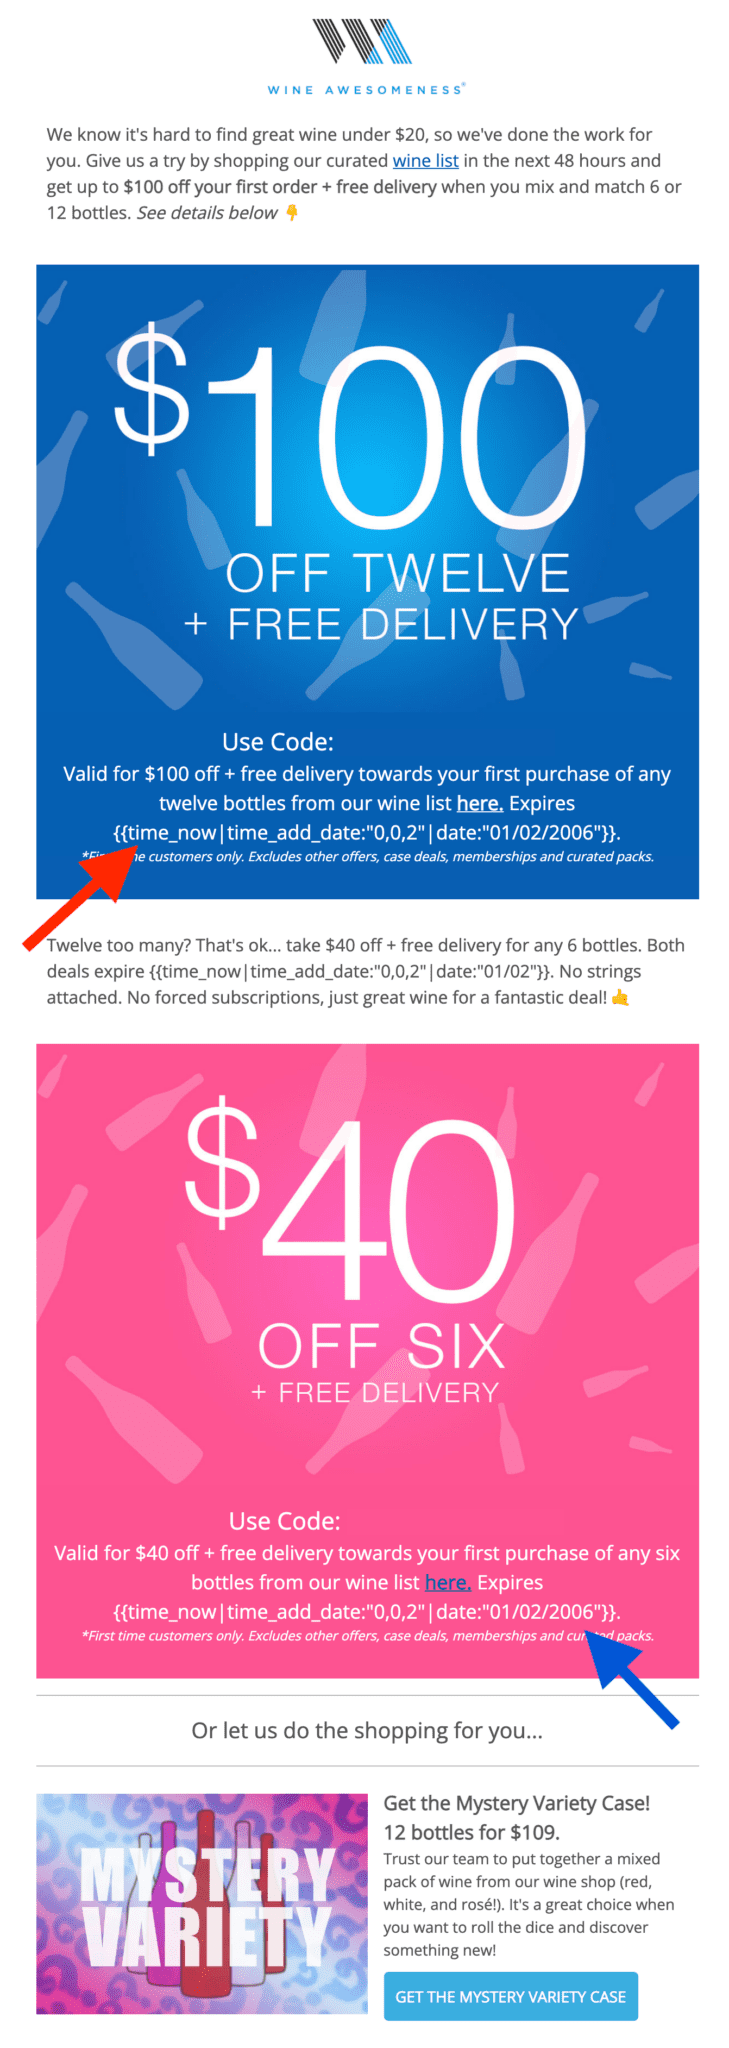 Personalized email marketing campaign for $100 dollars off of twelve wines. 